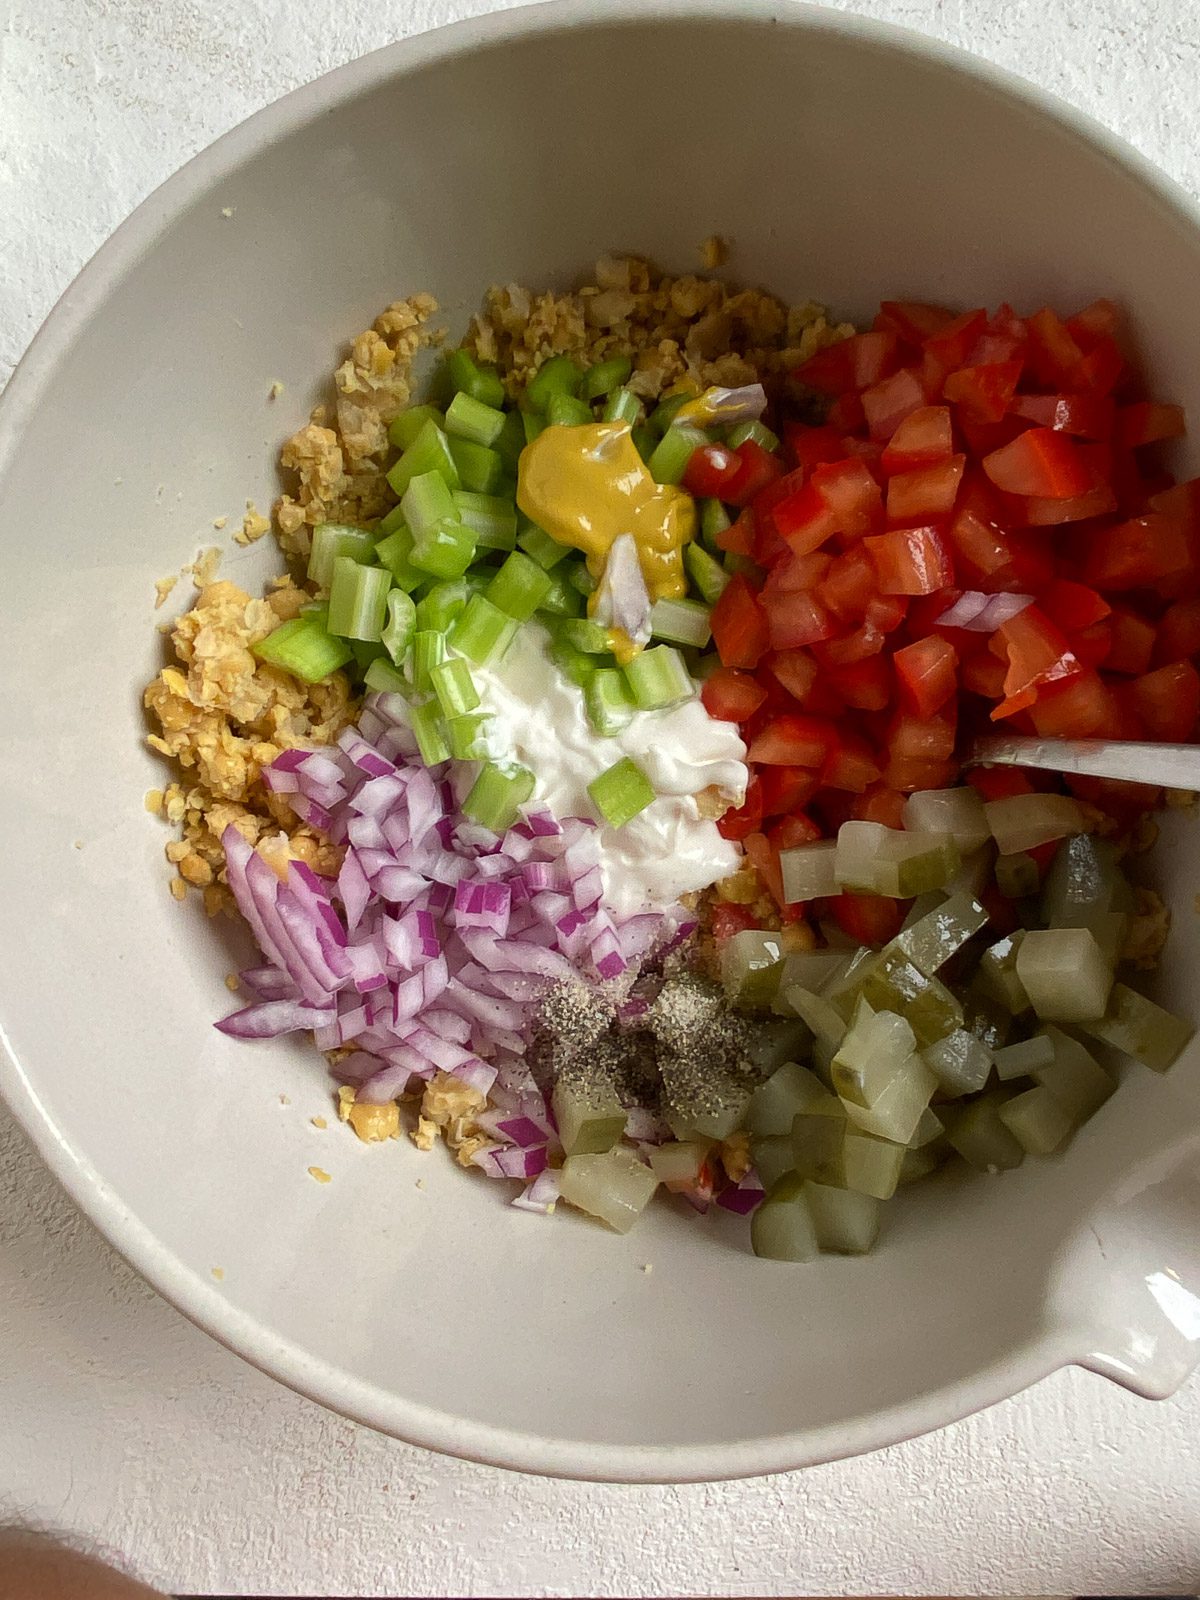 process of adding additional ingredients for a vegan chickpea salad sandwich in a white bowl